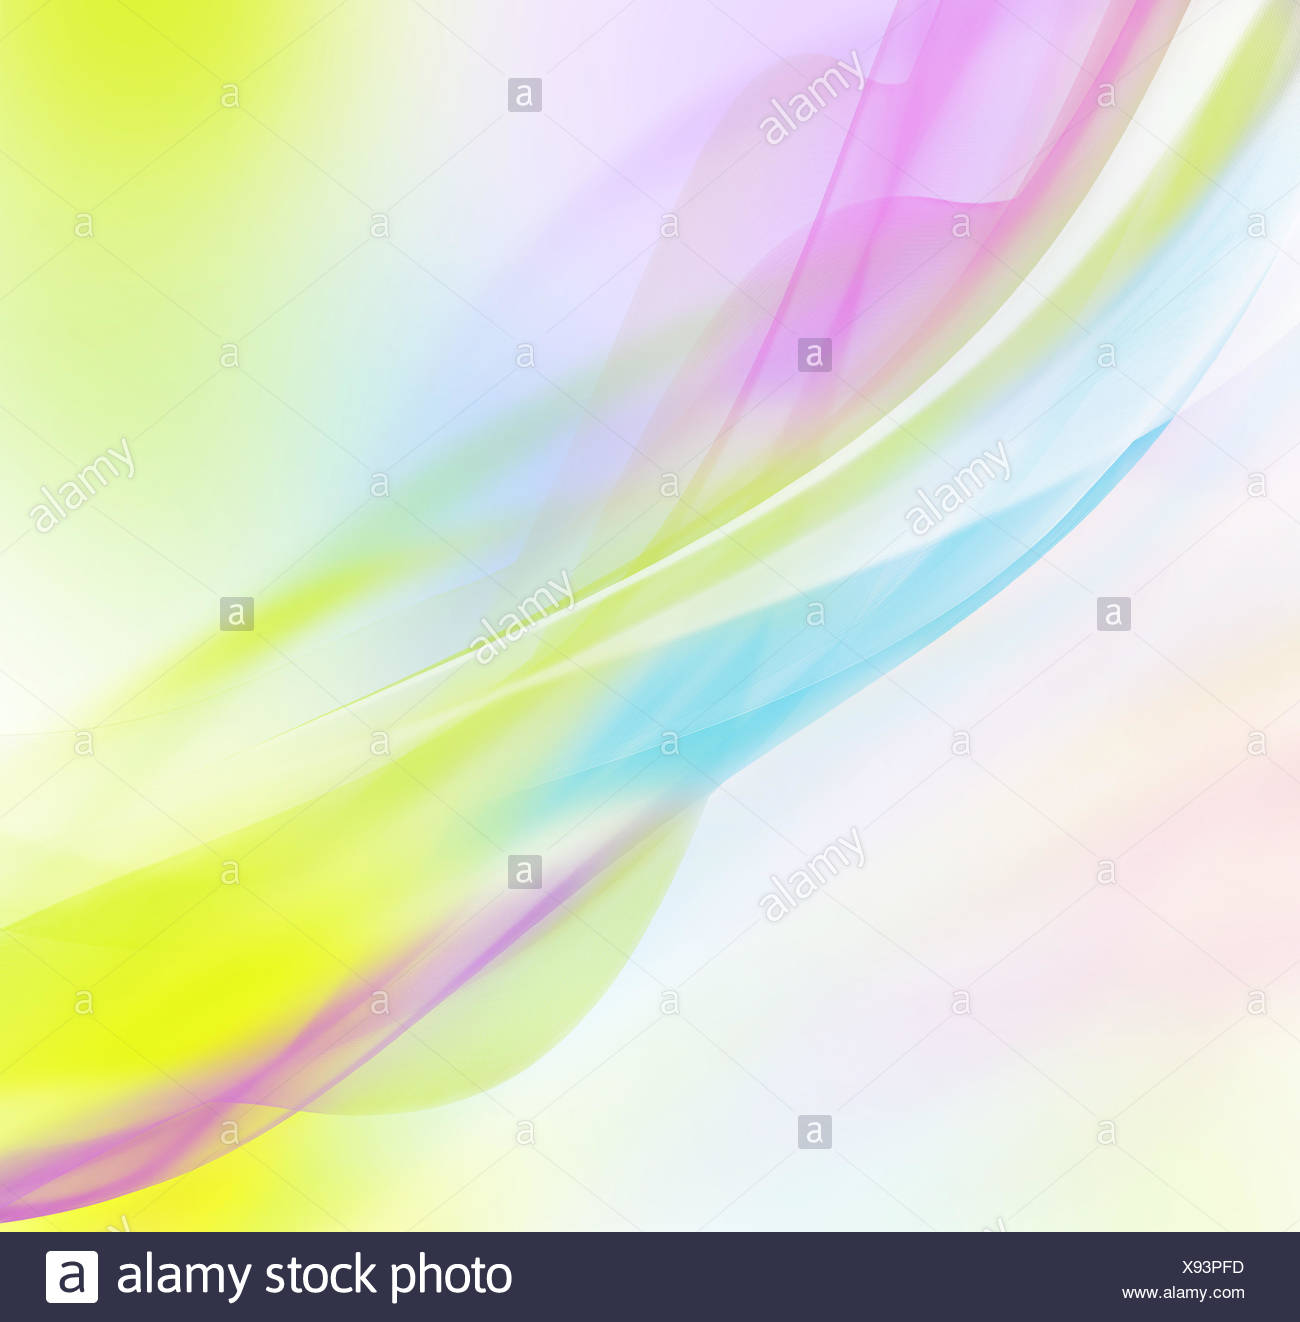 Abstract Modern Futuristic Colorful Background Bitmap Stock Photo